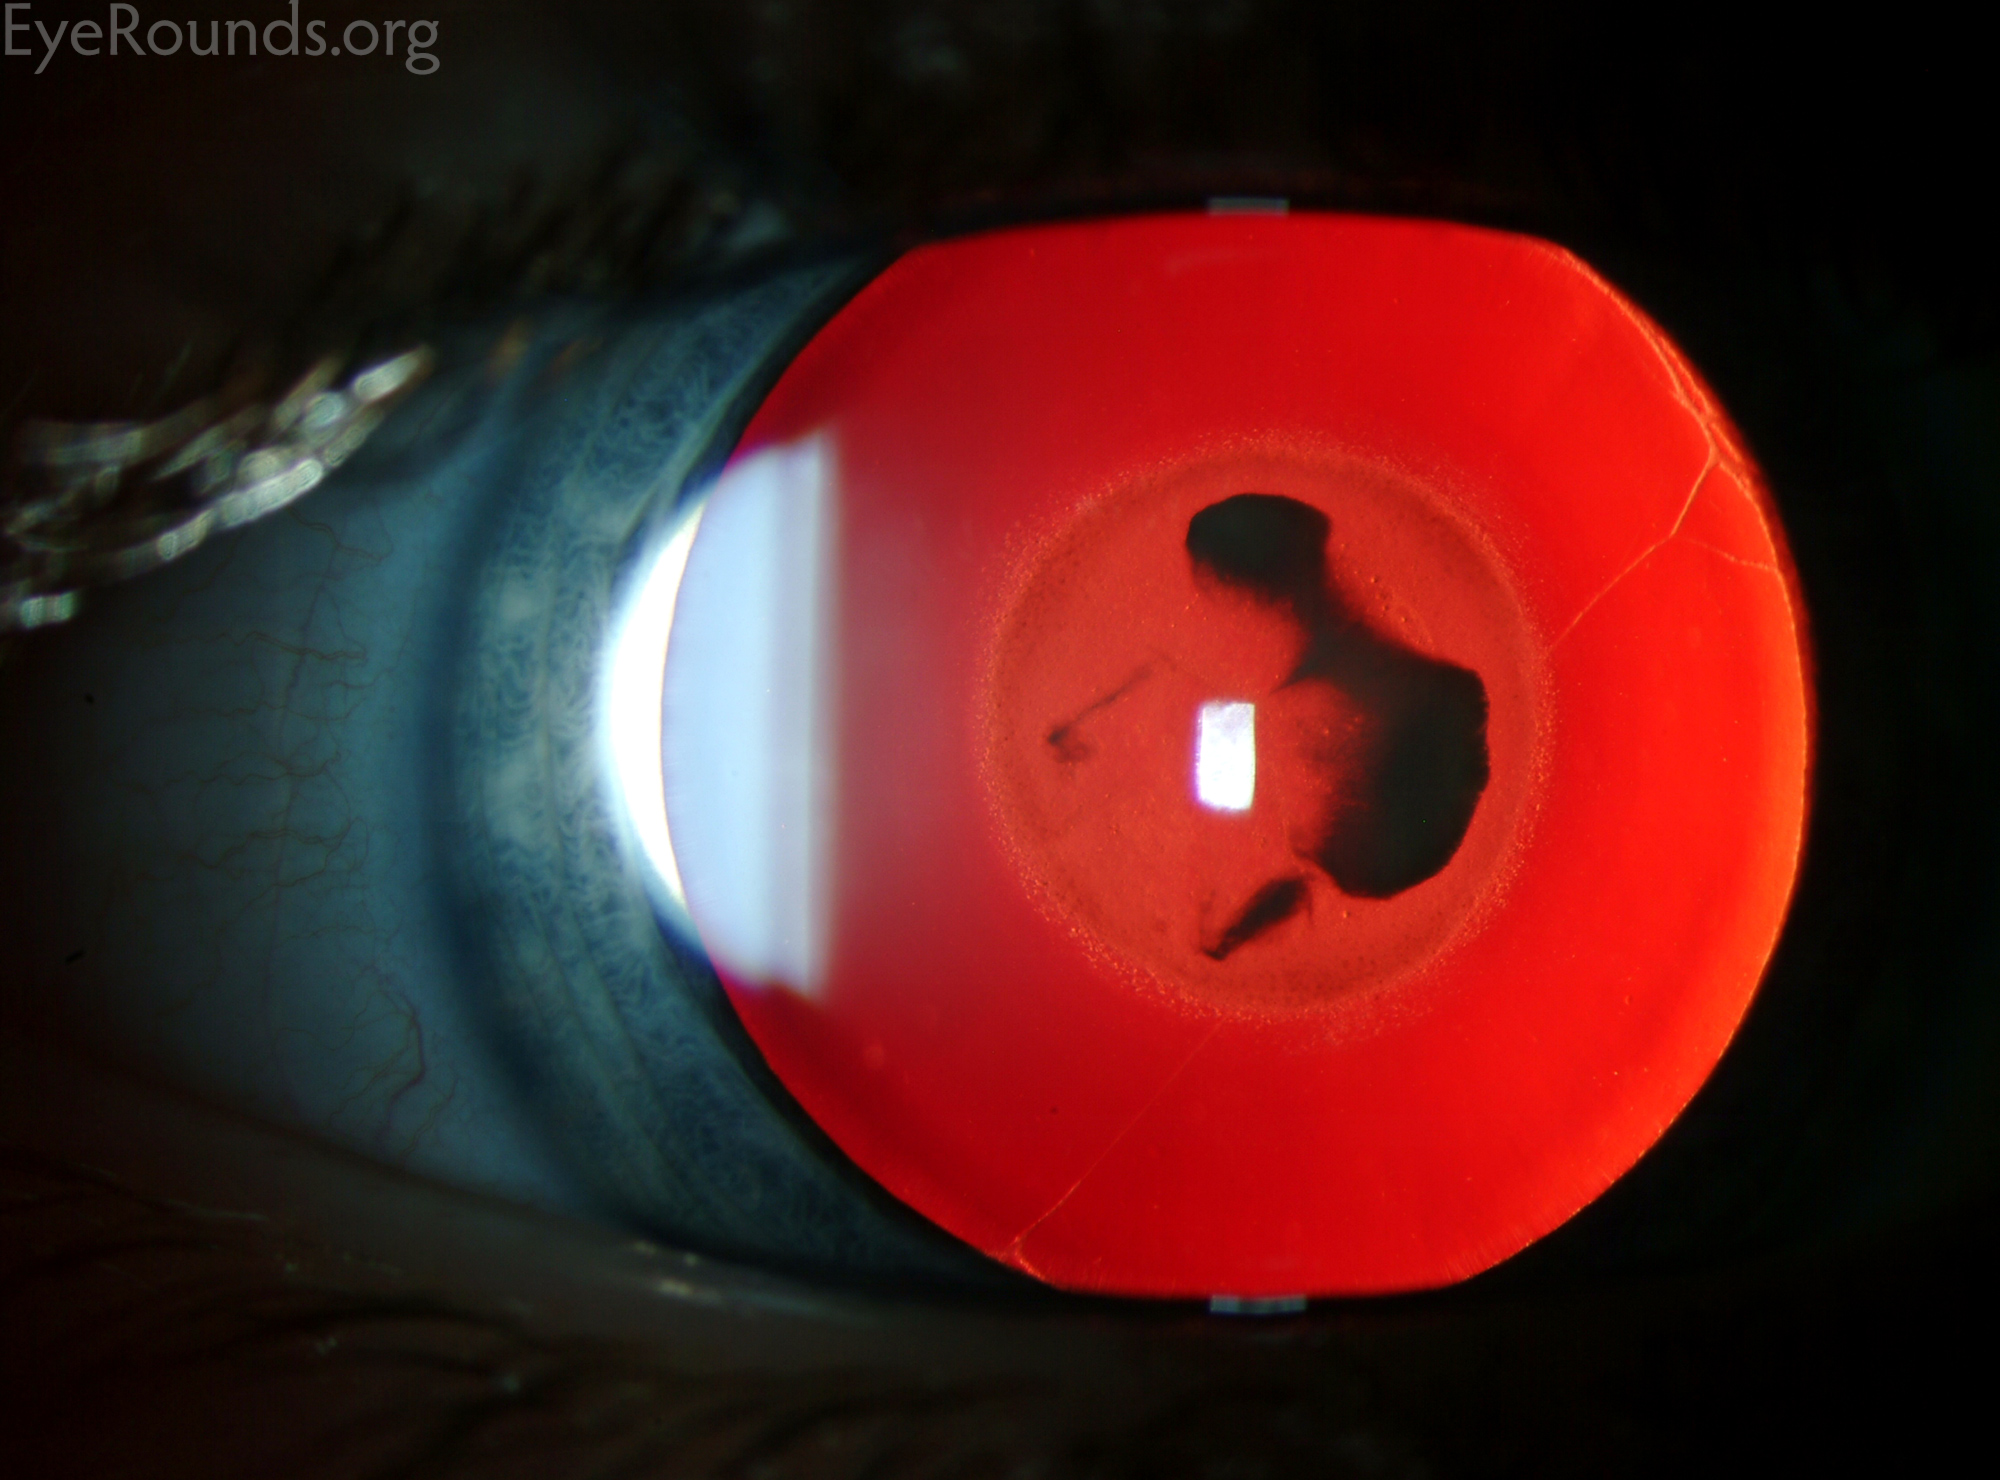 red reflex congential nuclear cataract